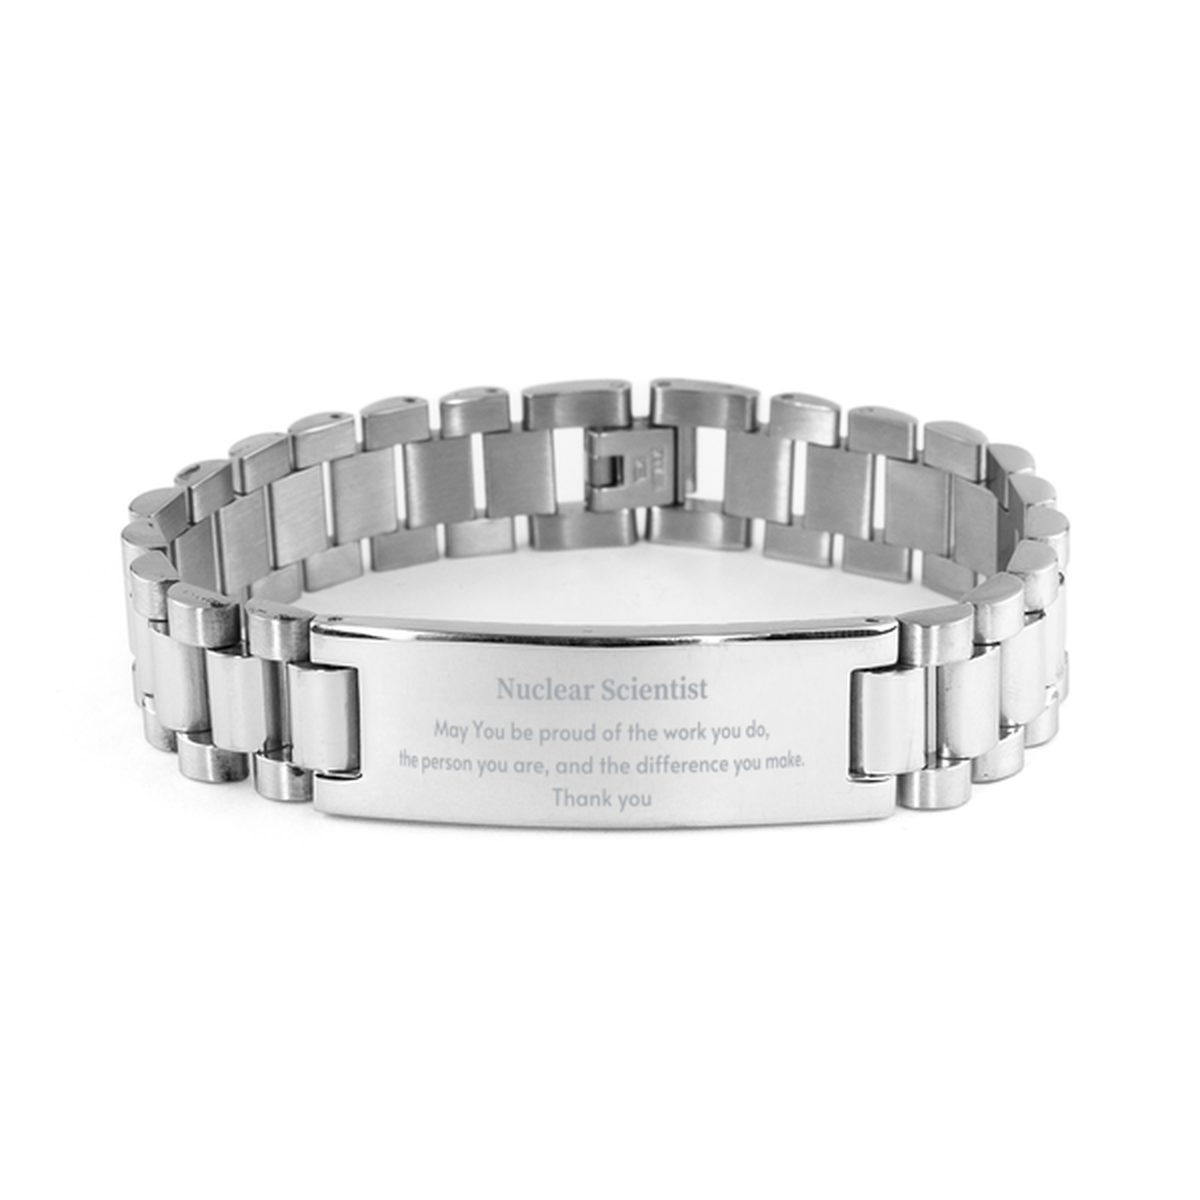 Heartwarming Ladder Stainless Steel Bracelet Retirement Coworkers Gifts for Nuclear Scientist, Nuclear Scientist May You be proud of the work you do, the person you are Gifts for Boss Men Women Friends